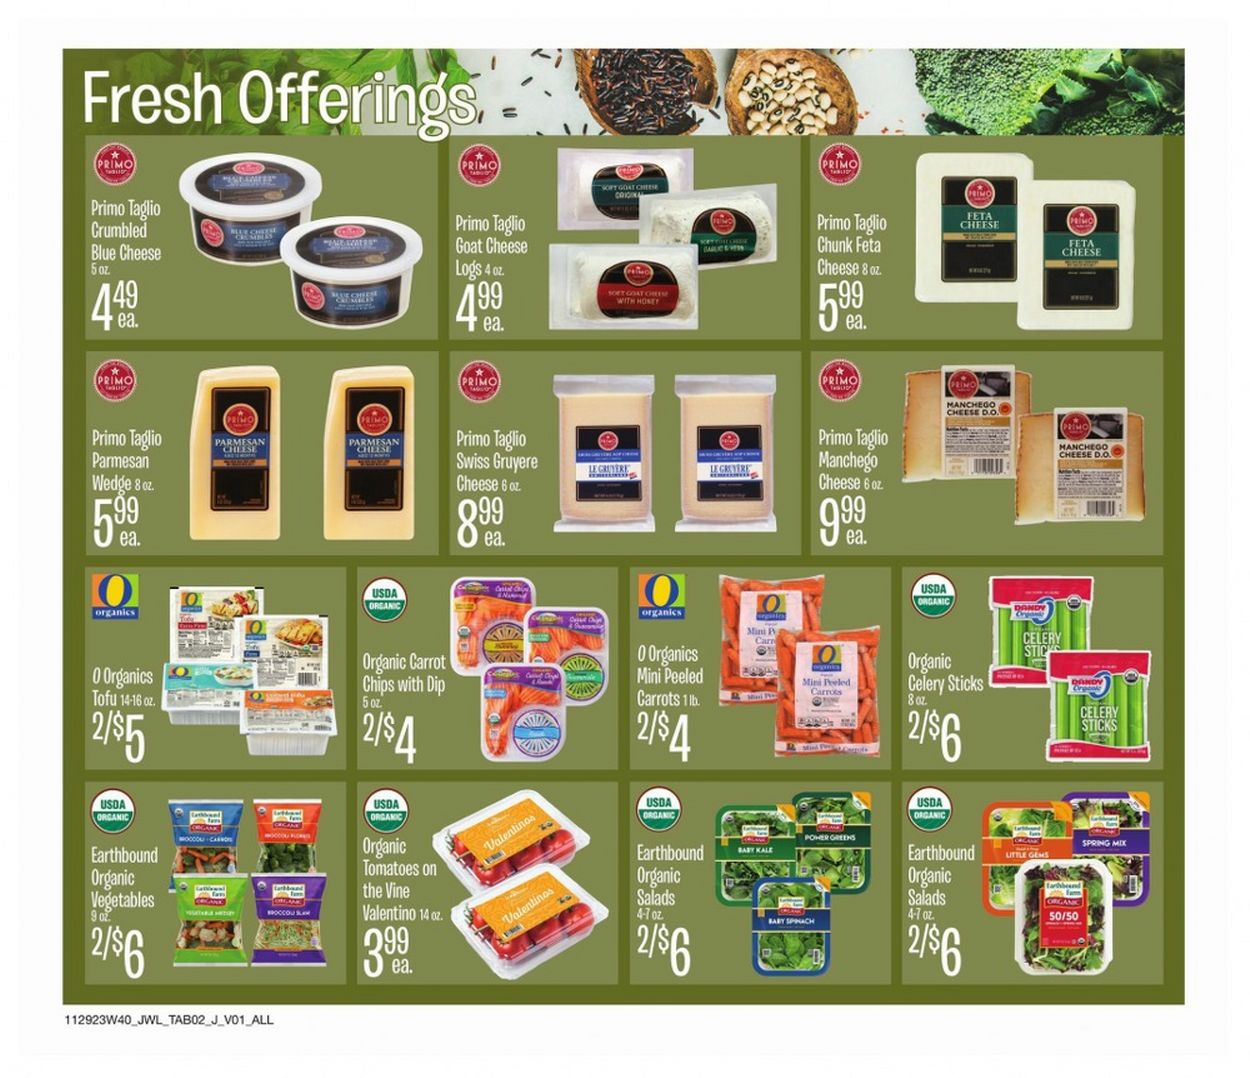 Jewel Osco Christmas July 2024 Weekly Sales, Deals, Discounts and Digital Coupons.